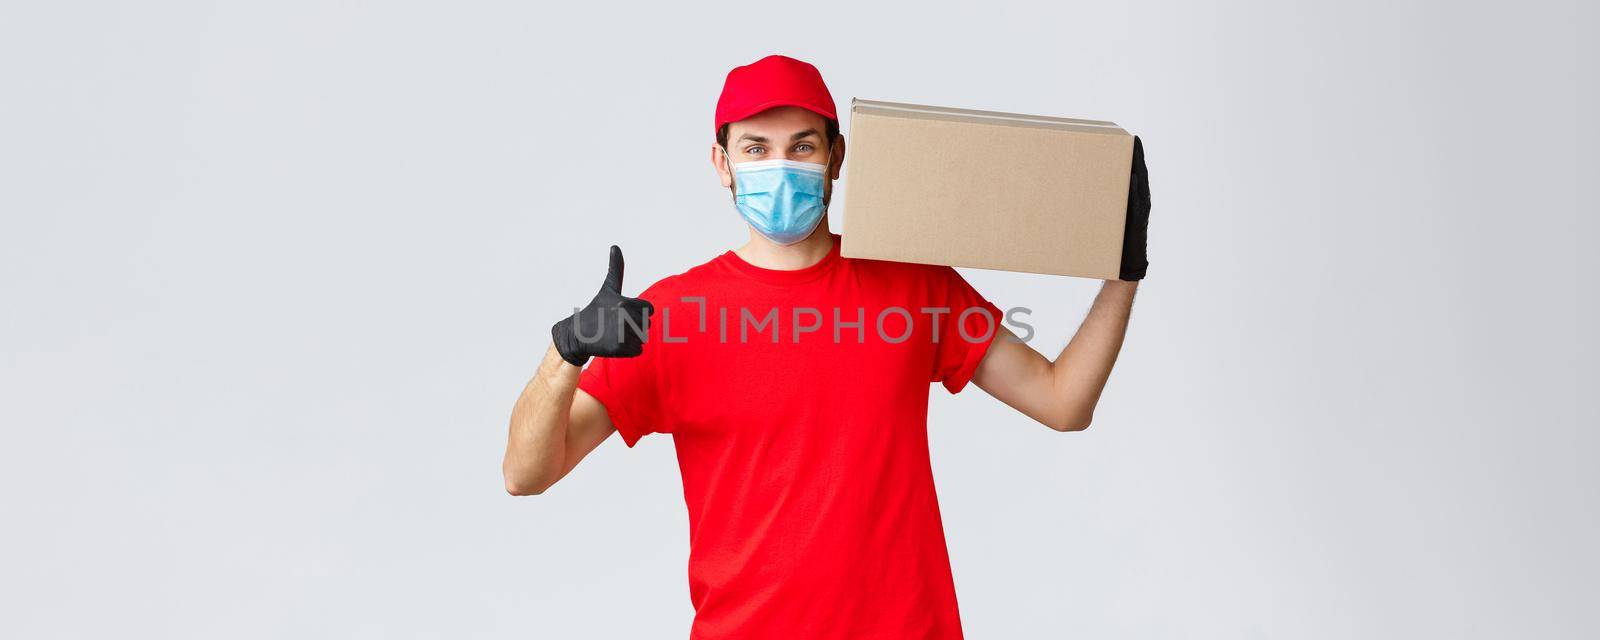 Packages and parcels delivery, covid-19 quarantine delivery, transfer orders. Cheerful courier in red uniform, gloves and face mask, thumb-up, no problem deliver order box to customers.